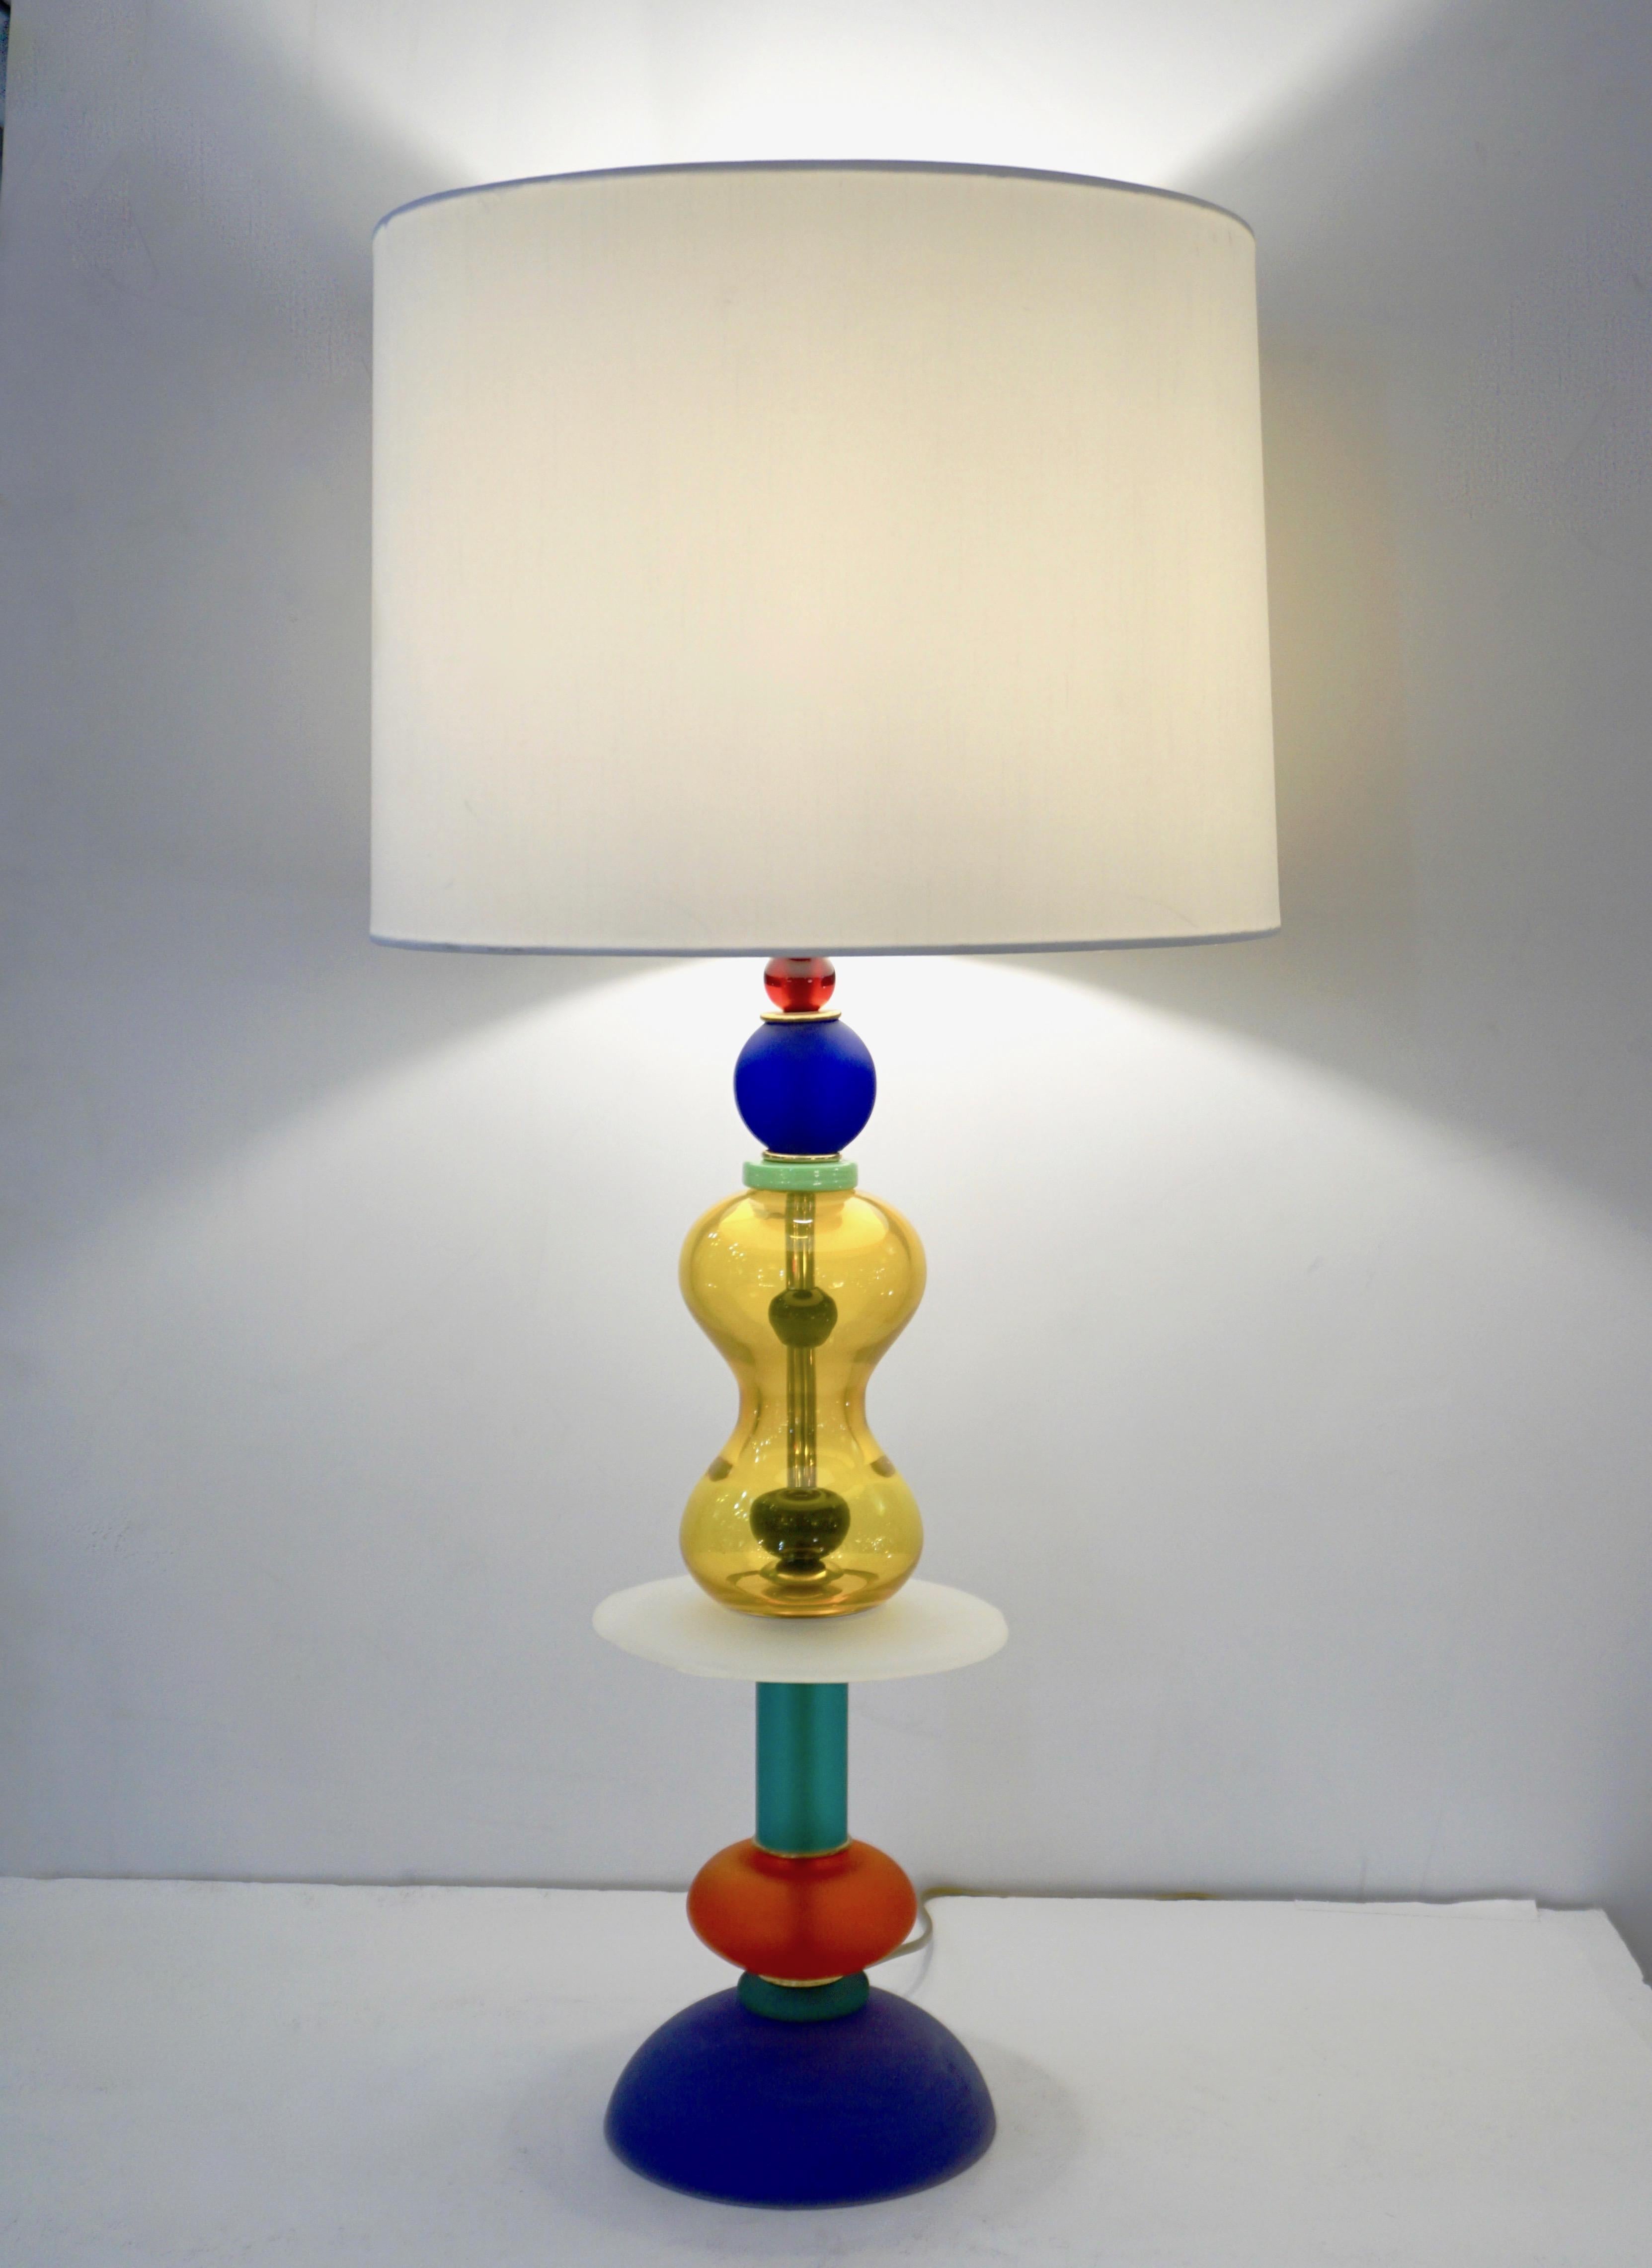 A 1980s unique pair of Italian colorful Murano glass lamps in the style of Ettore Sottsass for Memphis. Constructed with tiers of highly vibrant and geometrical colored blown Murano glass, each layer strategically placed for color and organic